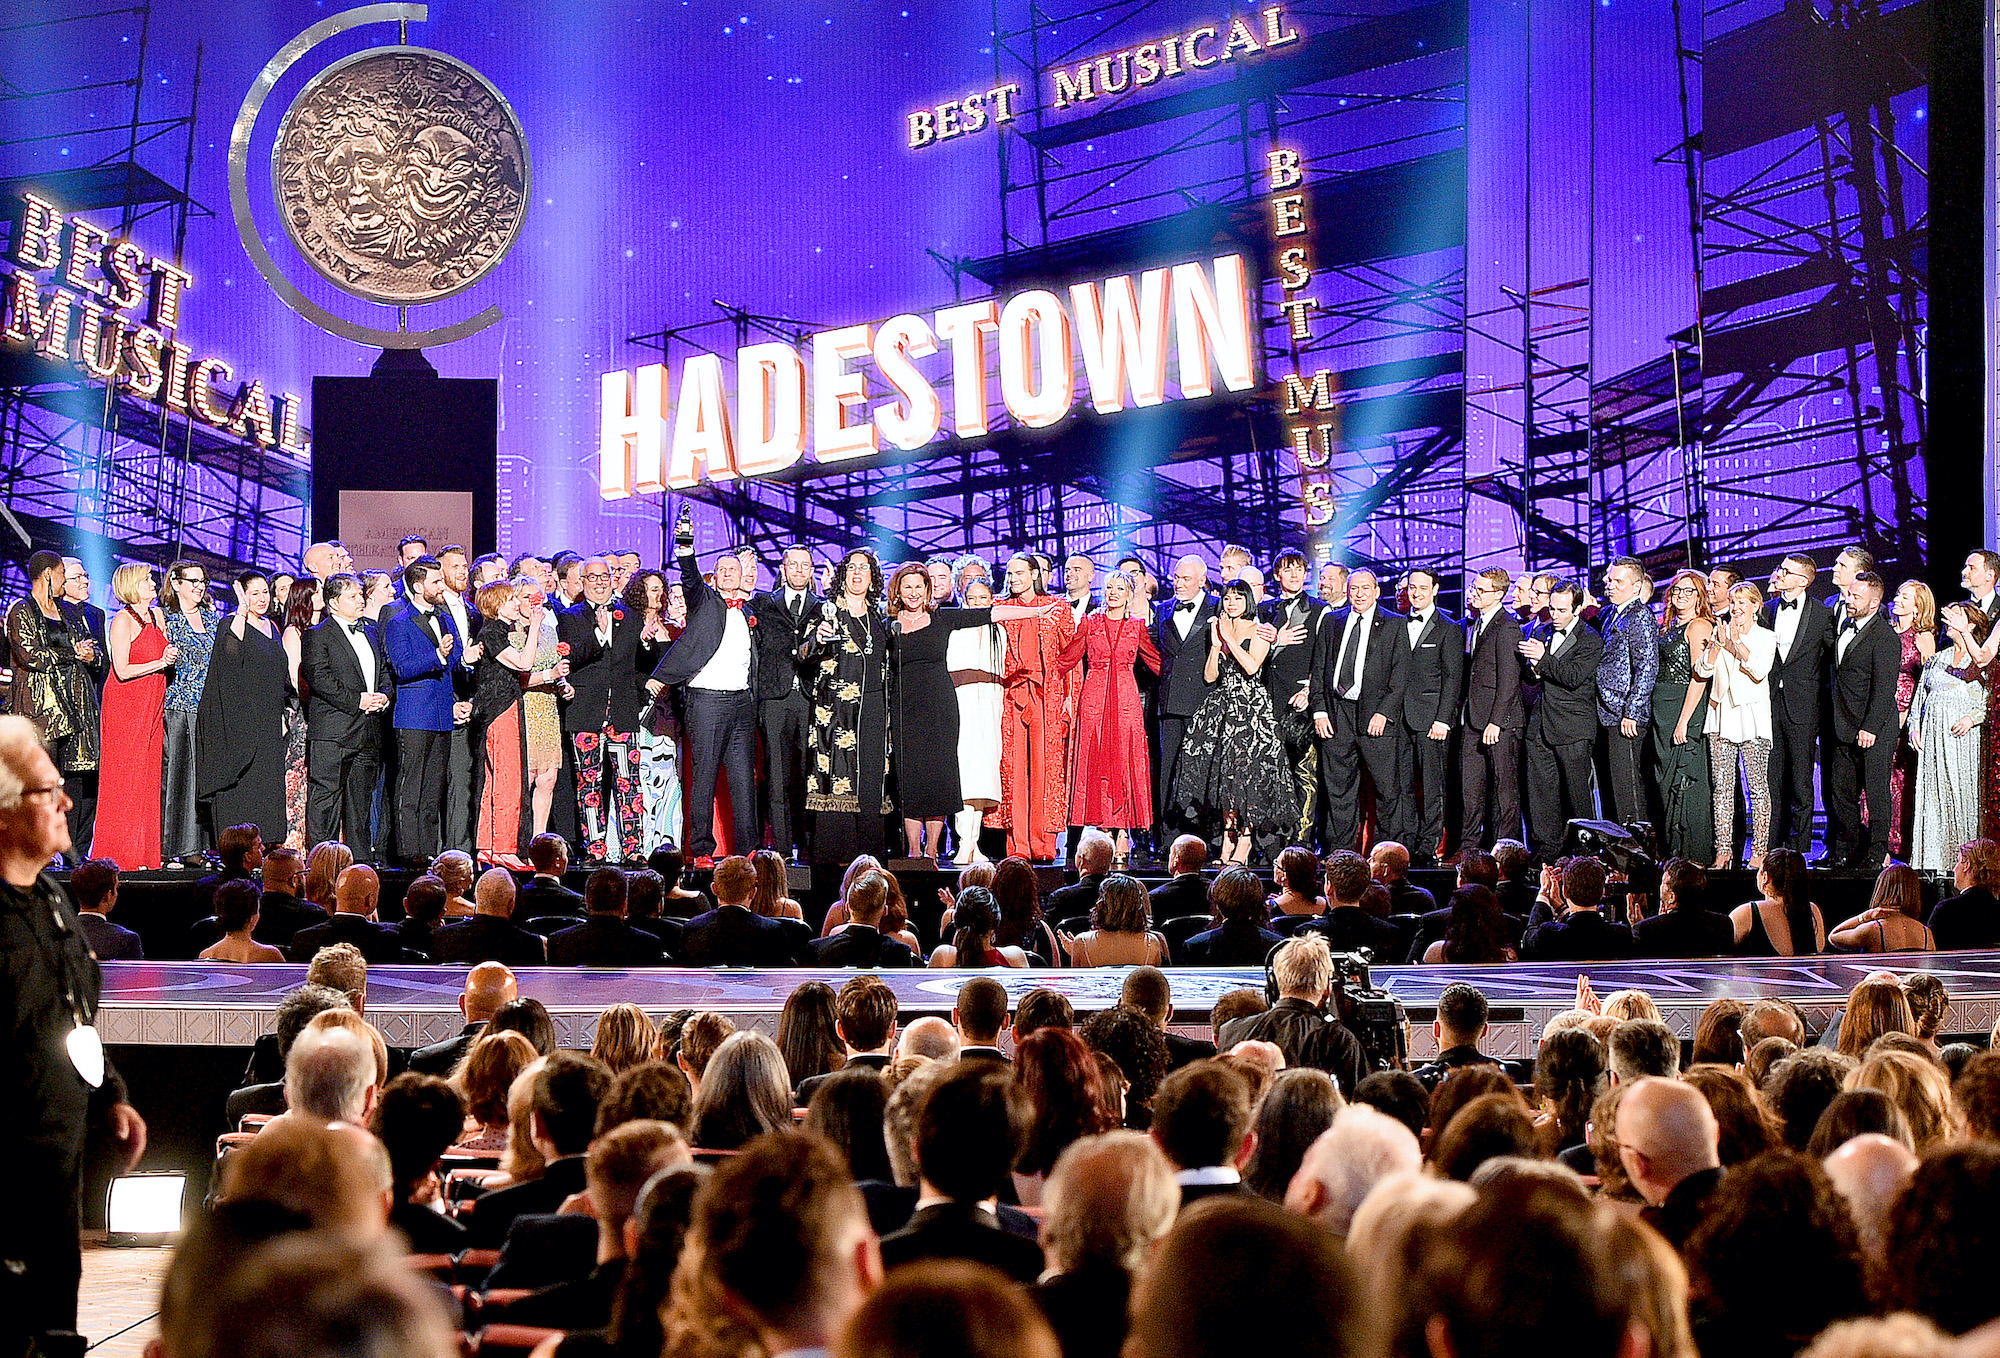 The cast and crew of Hadestown accept the award for Best Musical onstage at the 2019 Tony Awards. The 2021 Tony Awards take place Sunday, Sept. 26, marking the first Tony Awards ceremony since 2019.